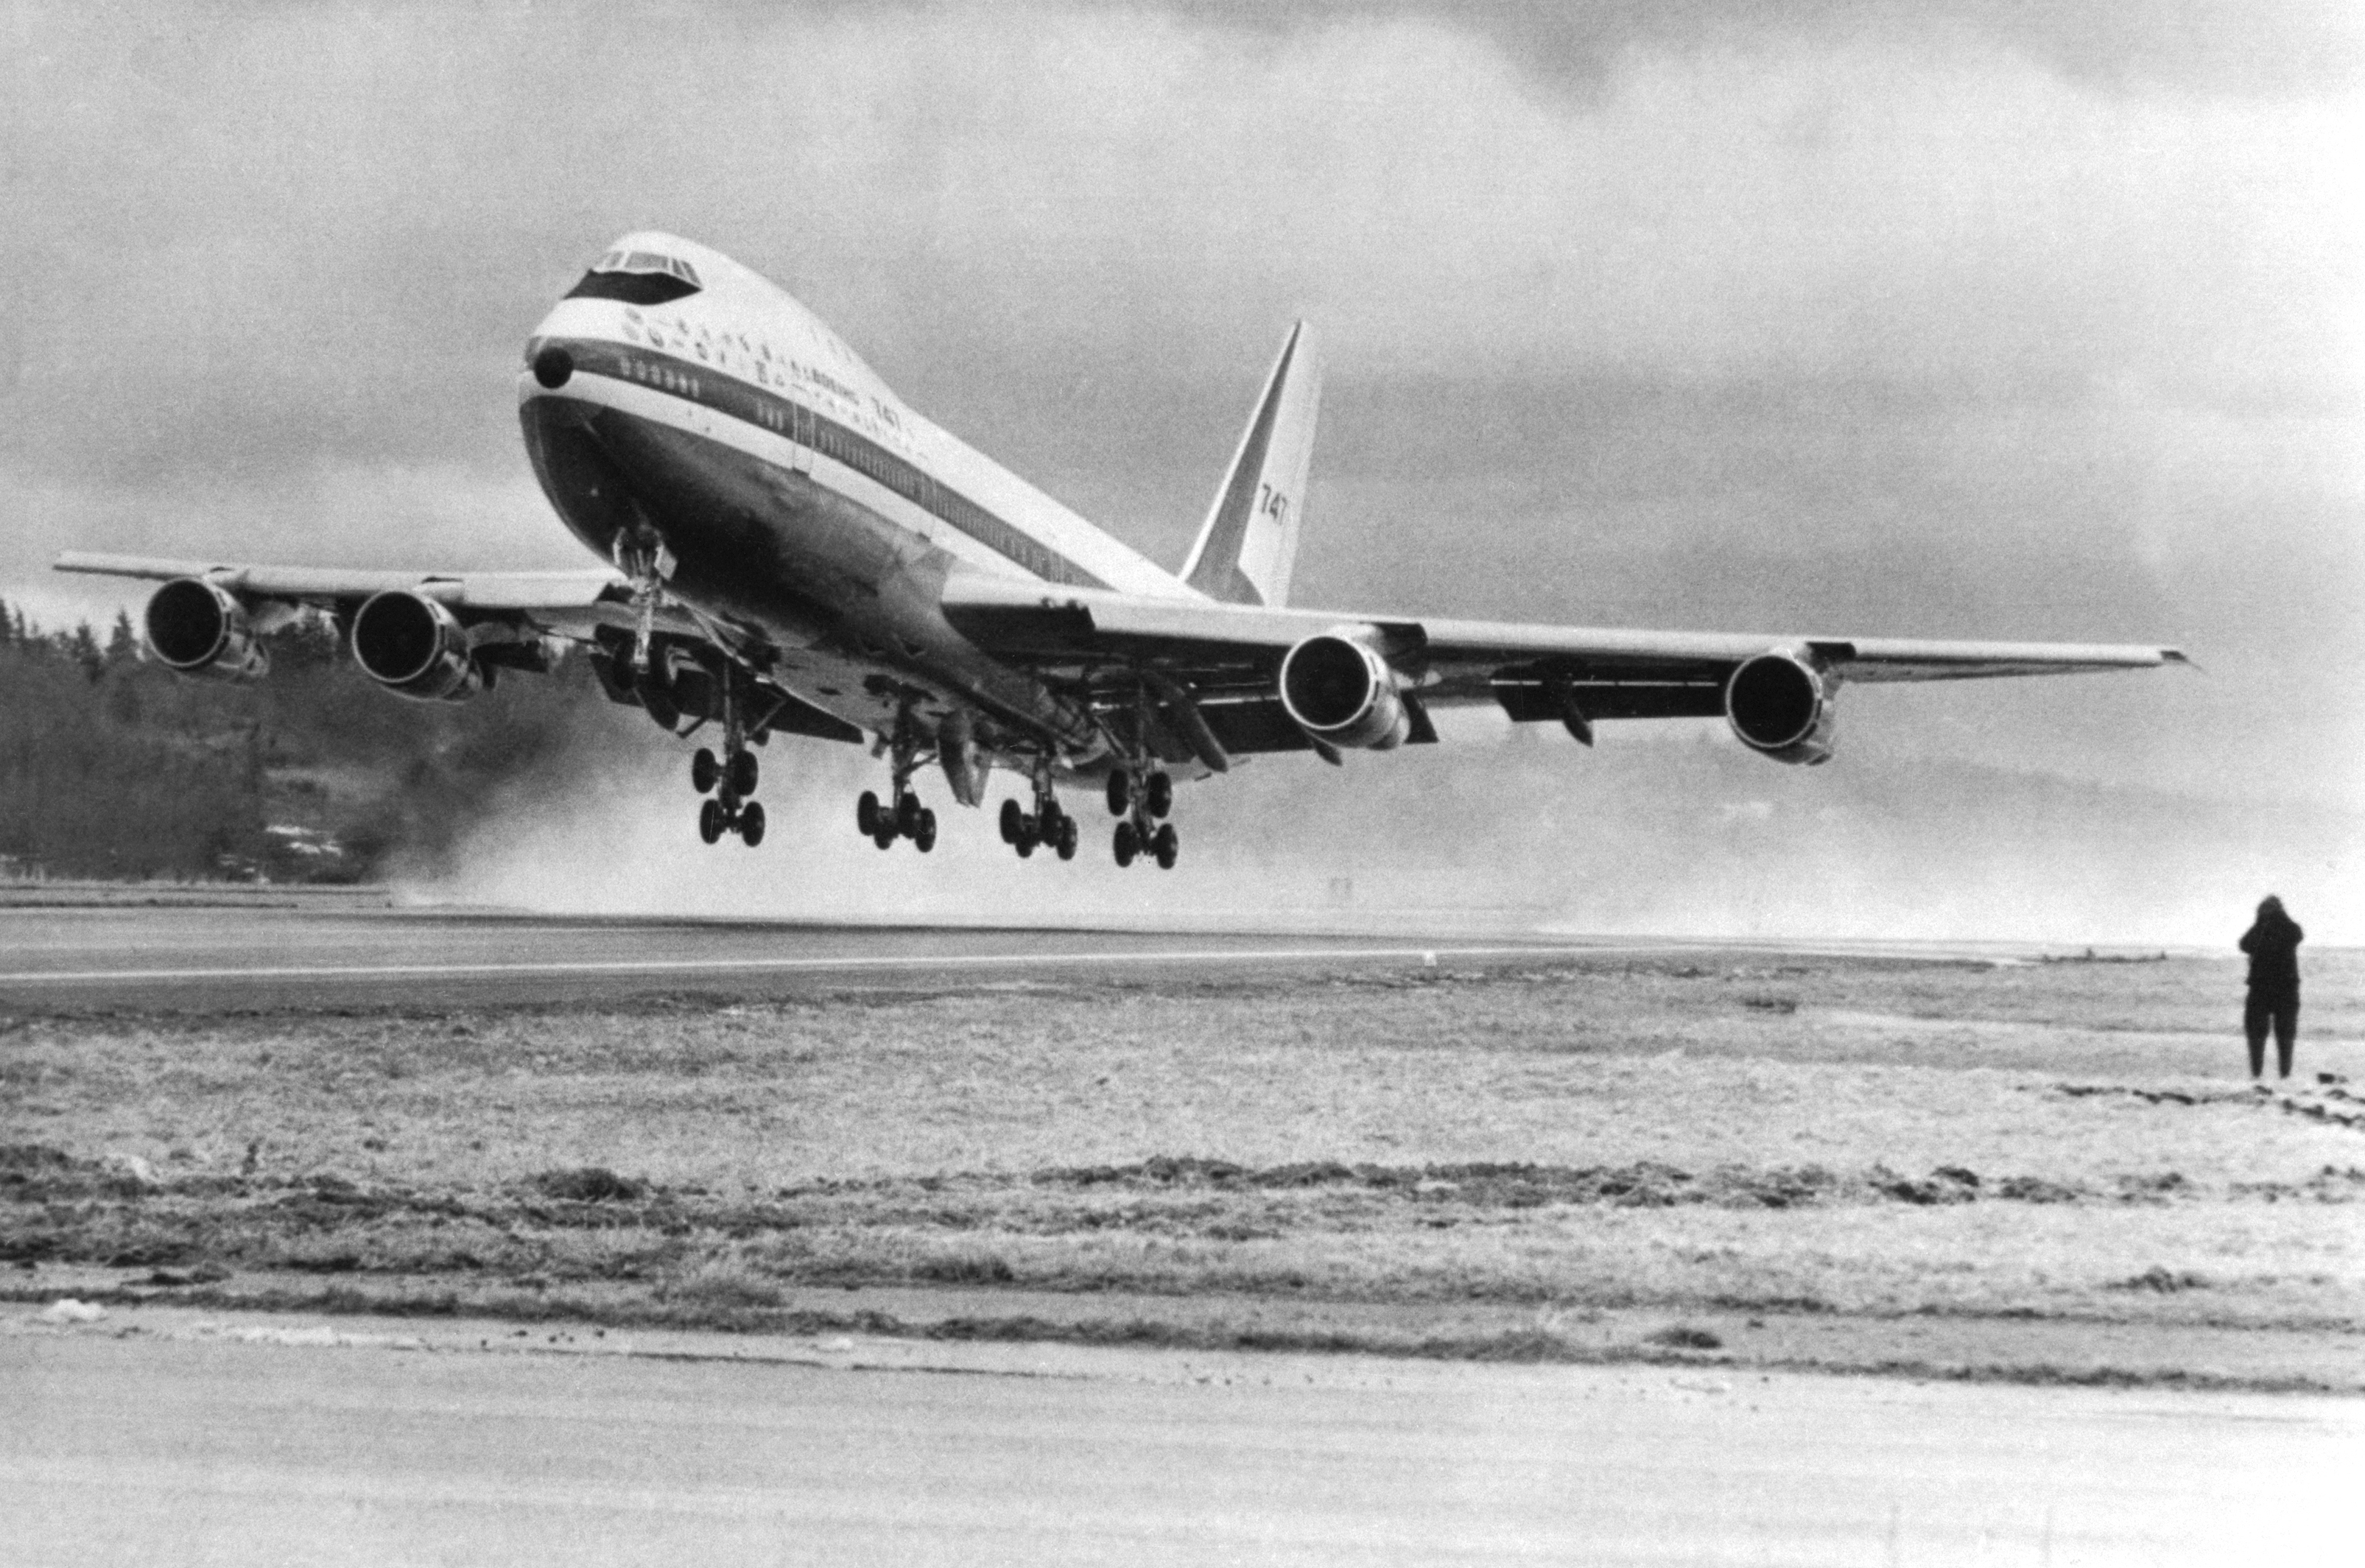 The world's largest commercial jetliner, the Boeing 747 makes its first takeoff 2/9. The 231 ft. jet used abut 4500 feet of runway and became airborne at a speed of about 170 MPH. (Bettmann Archive / Getty Images)